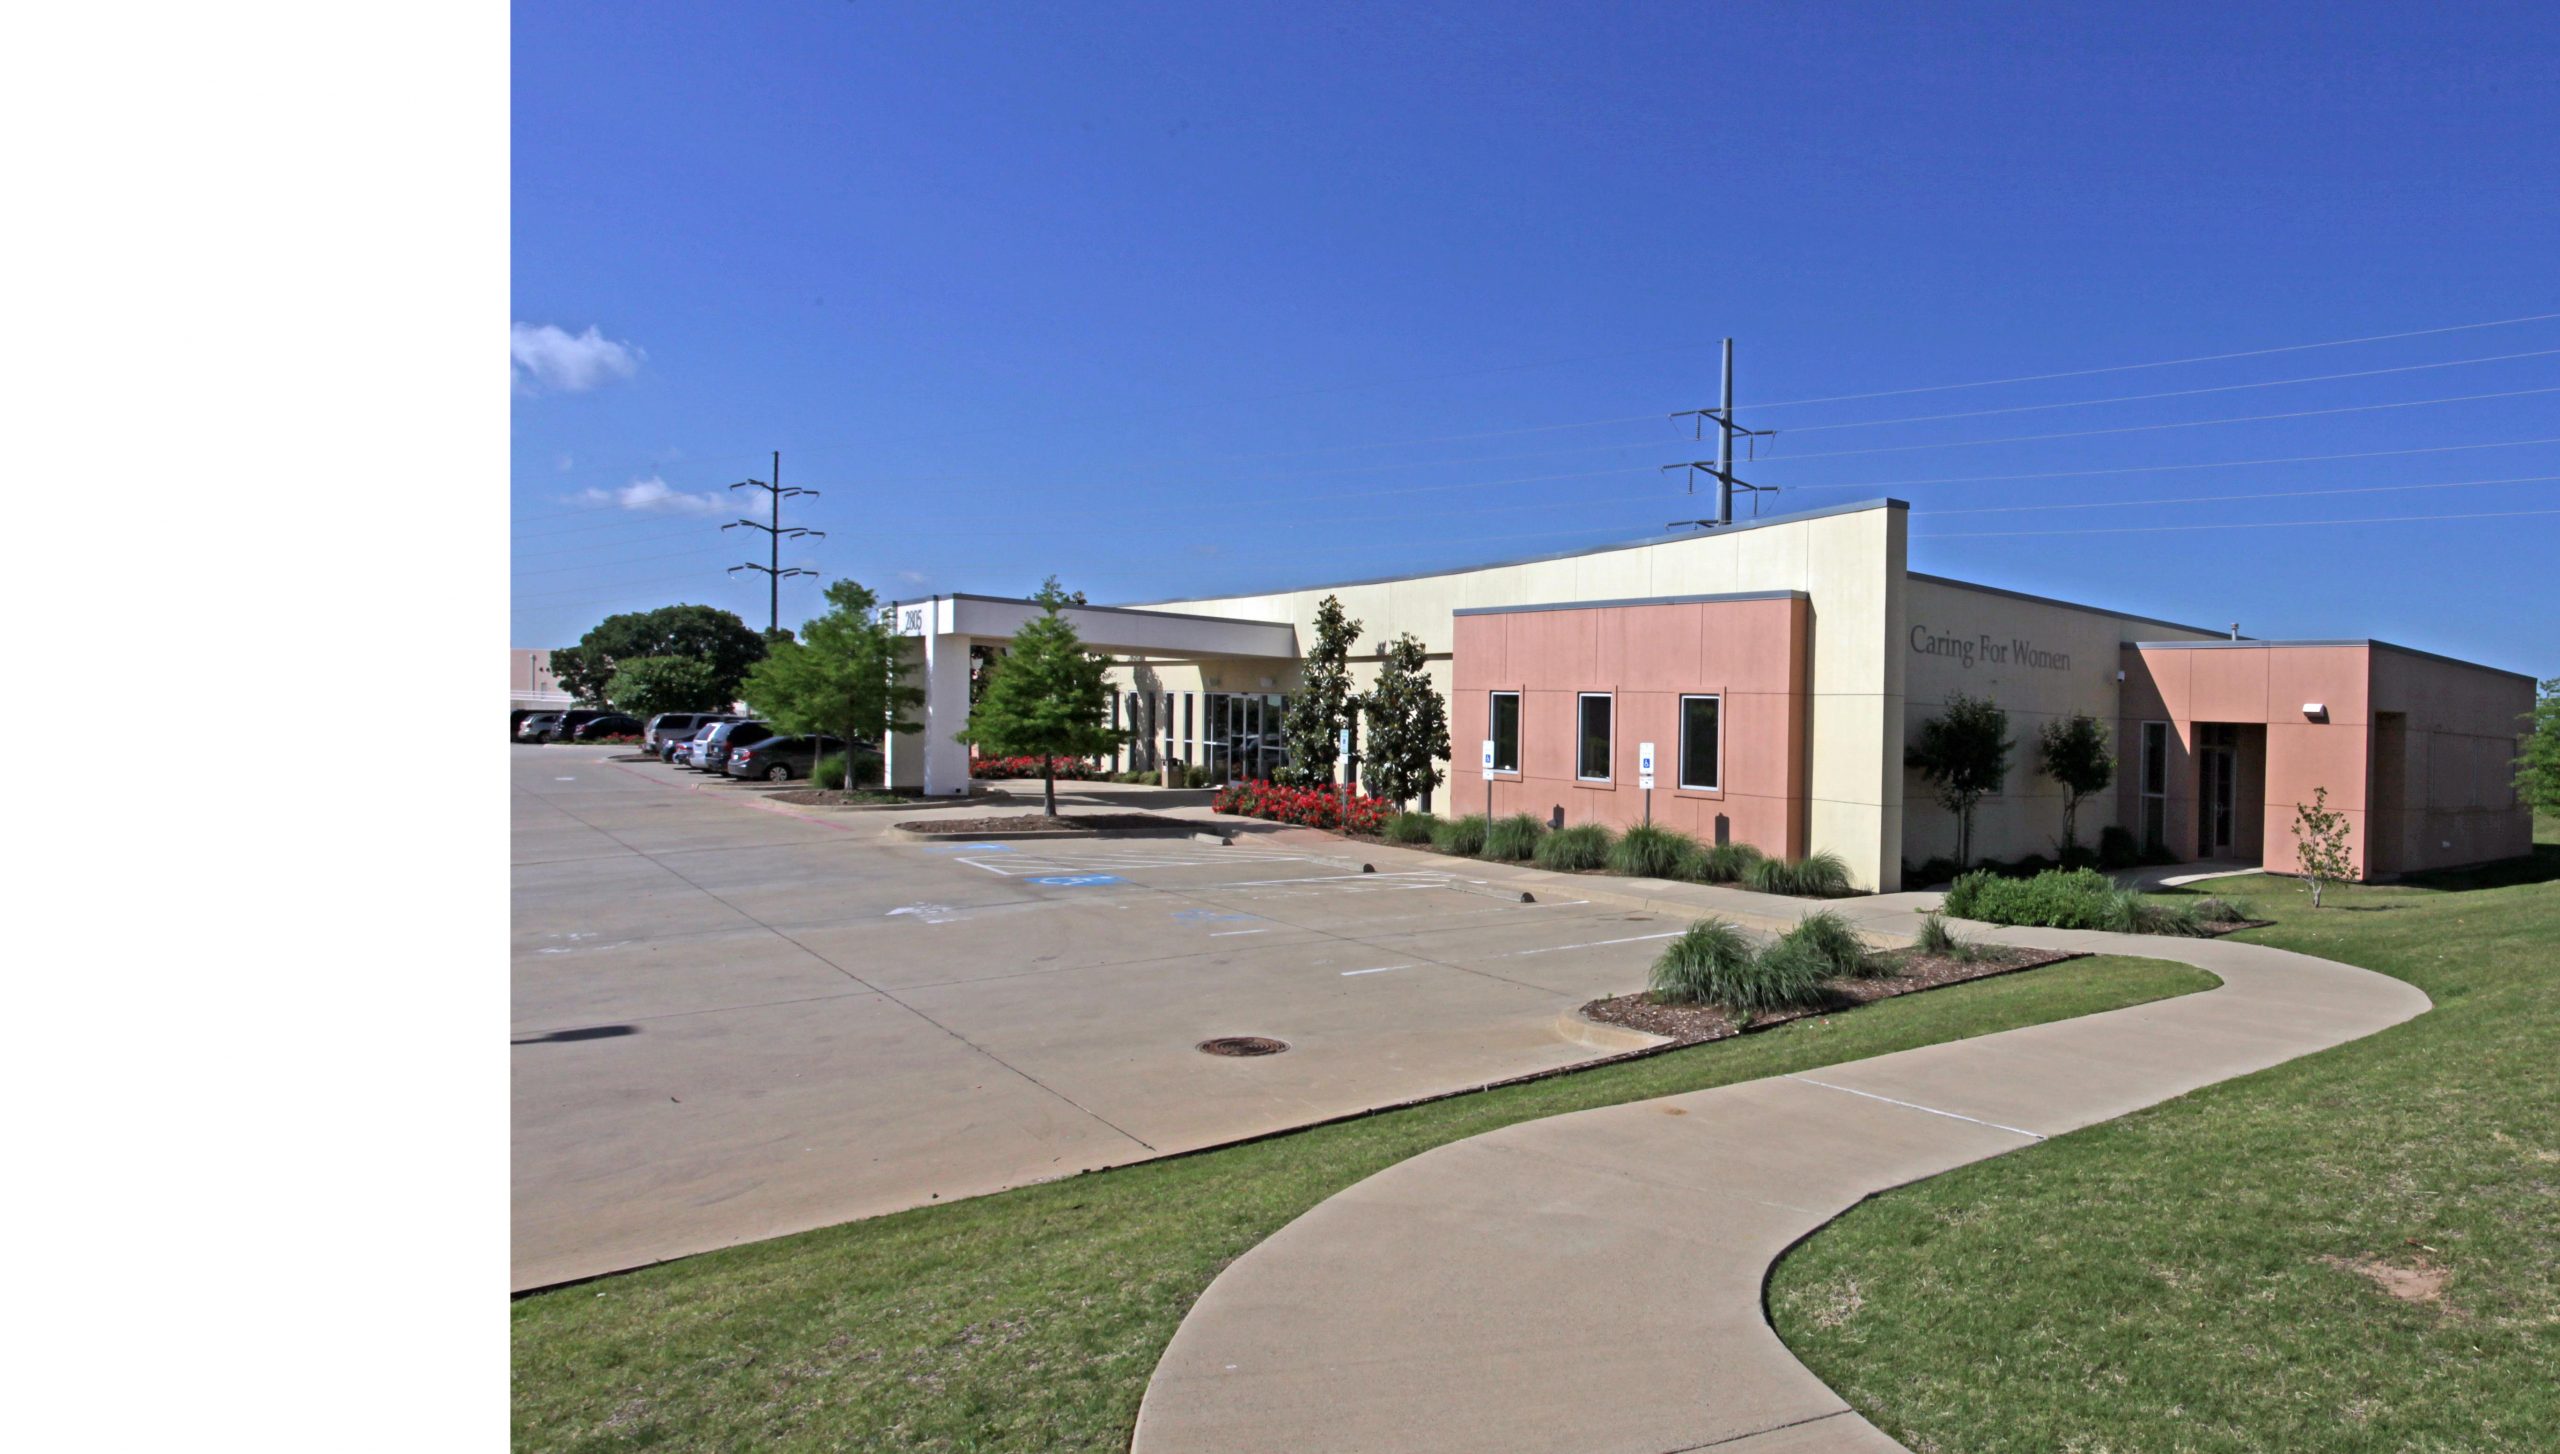 Caring For Women - Denton, Tx - Commericial Real Estate serapportantà Denton Medical Offices For Lease 